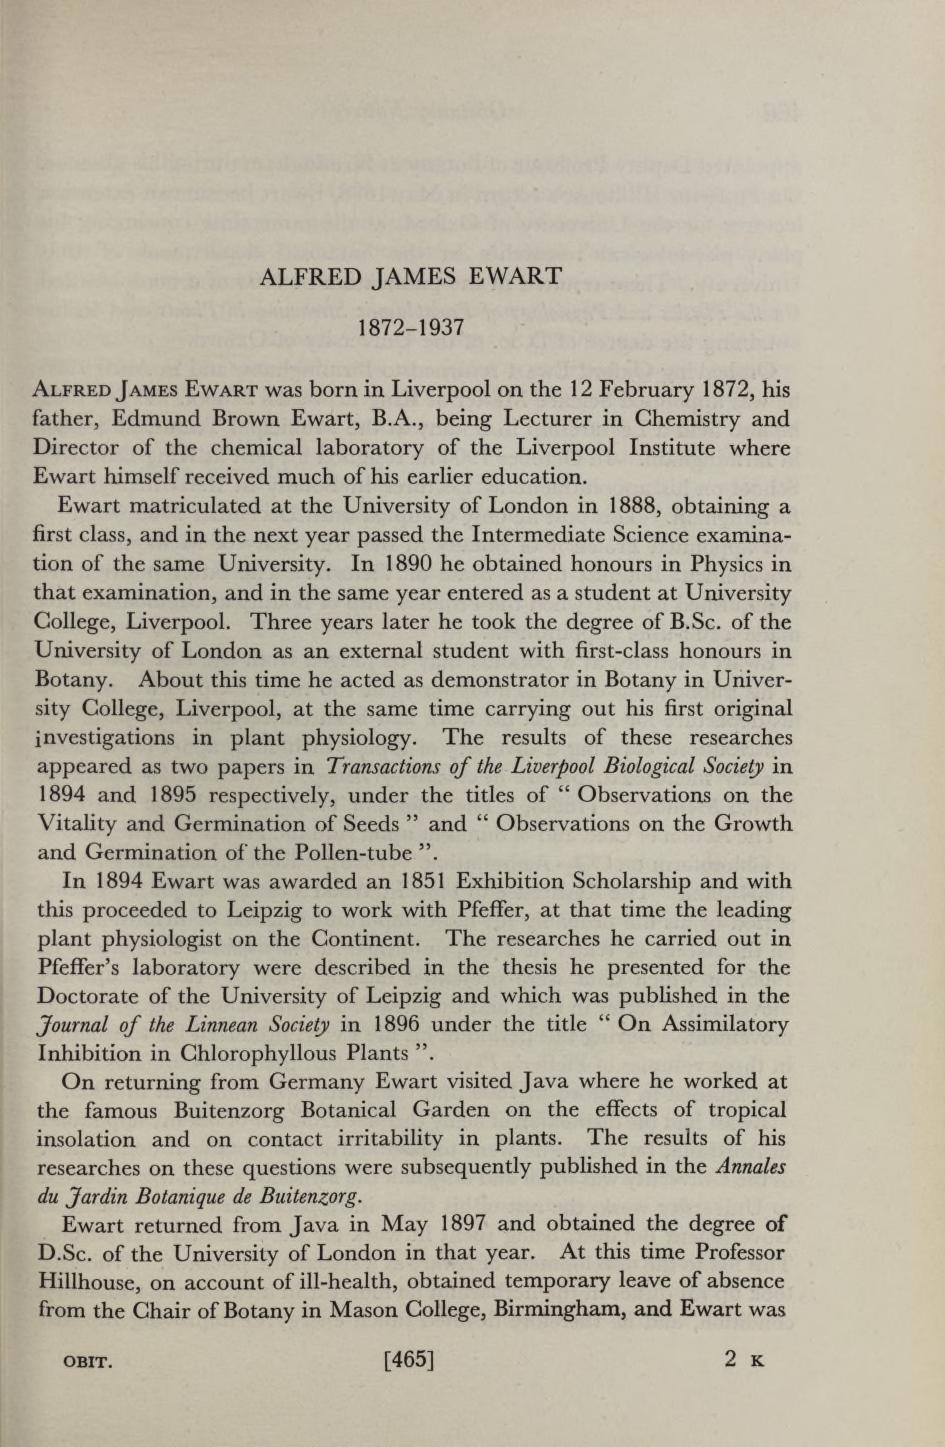 ALFRED JAMES EWART 1872-1937 Alfred J ames Ewart was born in Liverpool on the 12 February 1872, his father, Edmund Brown Ewart, B.A., being Lecturer in Chemistry and Director of the chemical laboratory of the Liverpool Institute where Ewart himself received much of his earlier education.